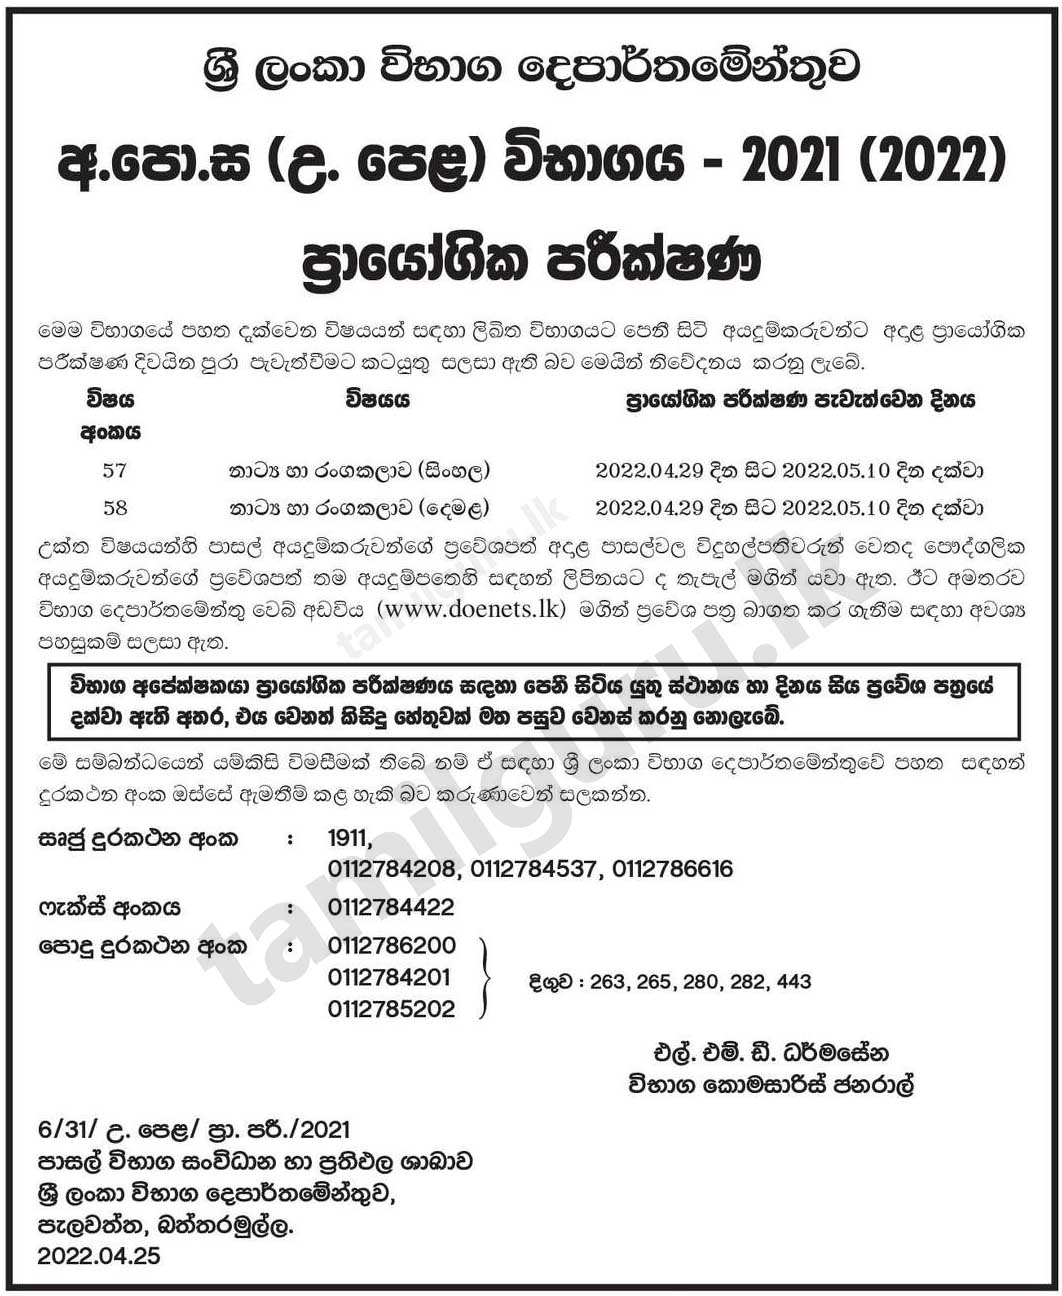 Admission Card for Practical Tests (Drama & Theatre) - G.C.E A/L Examination - 2021 (2022) (Details in Sinhala)